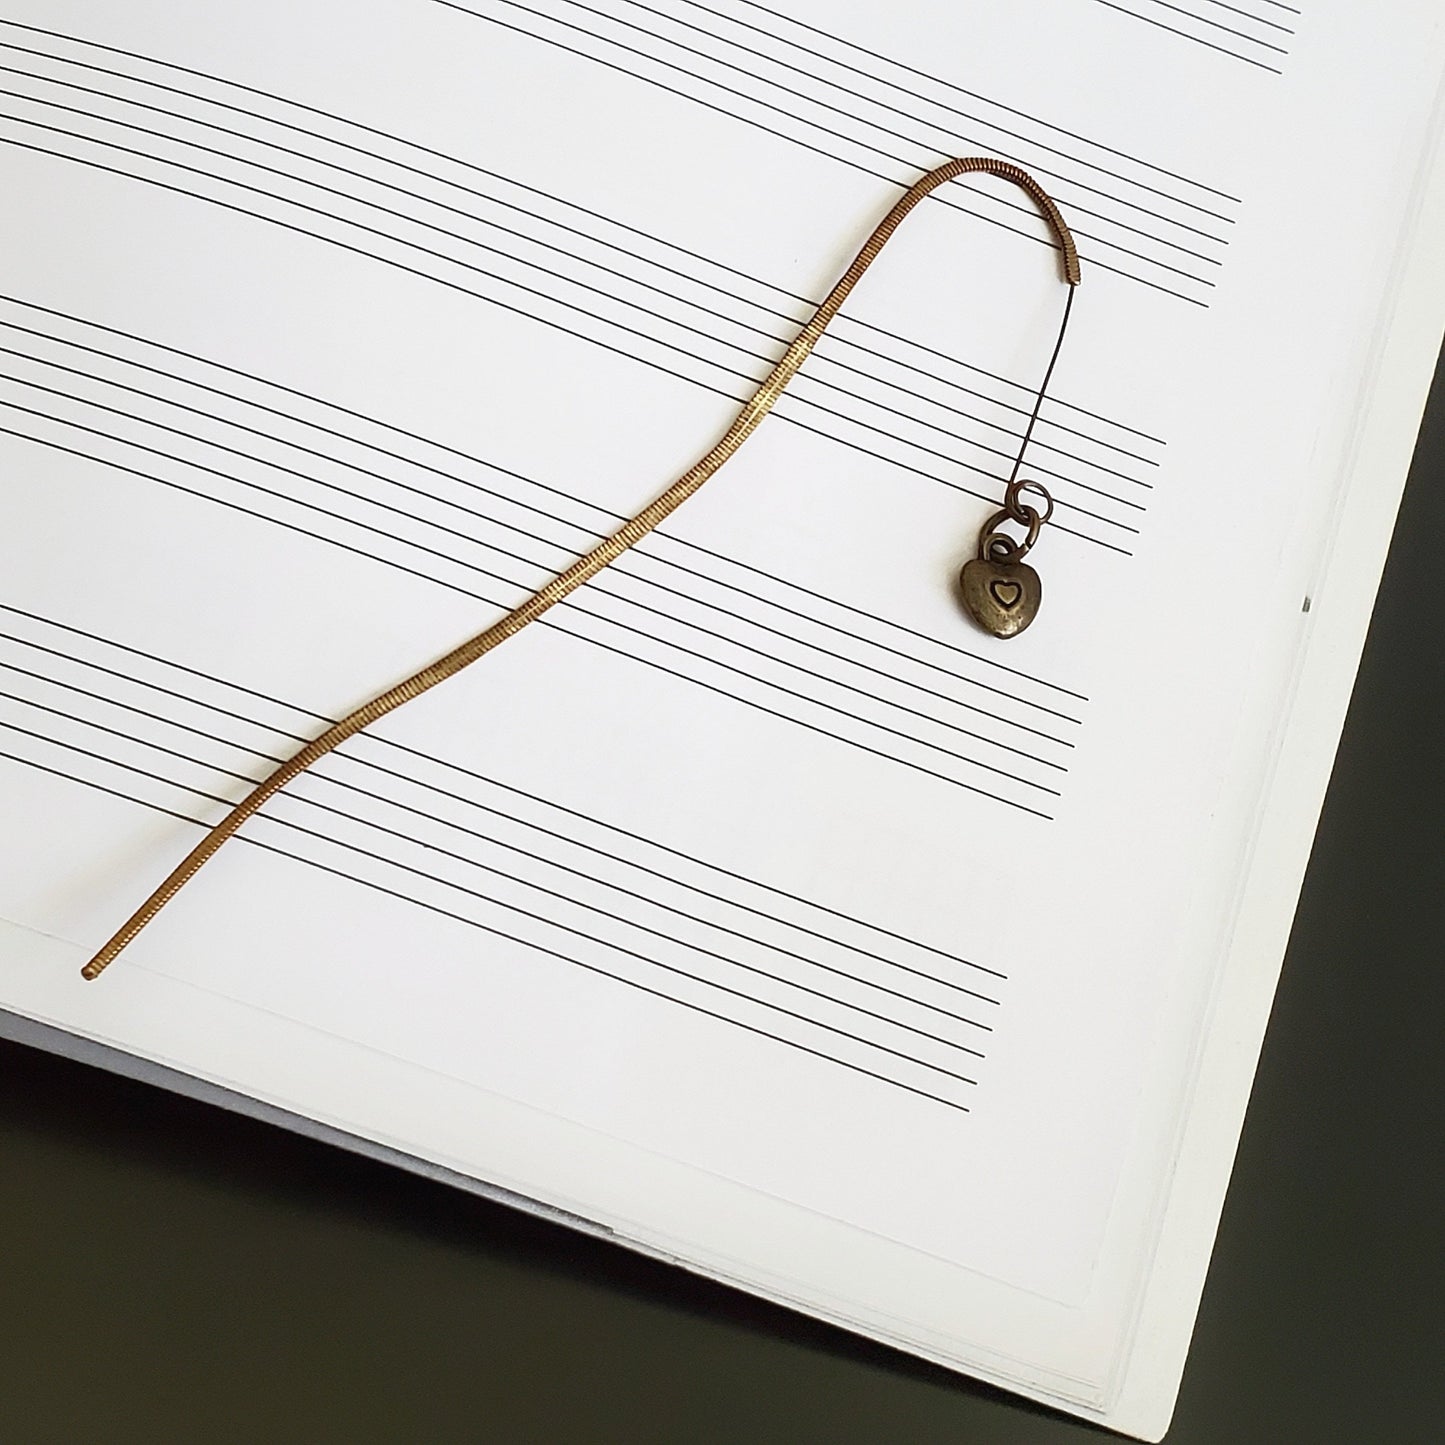 hook style bookmark made from an upcycled guitar string with a copper coloured heart shaped charm - background is blank sheet music